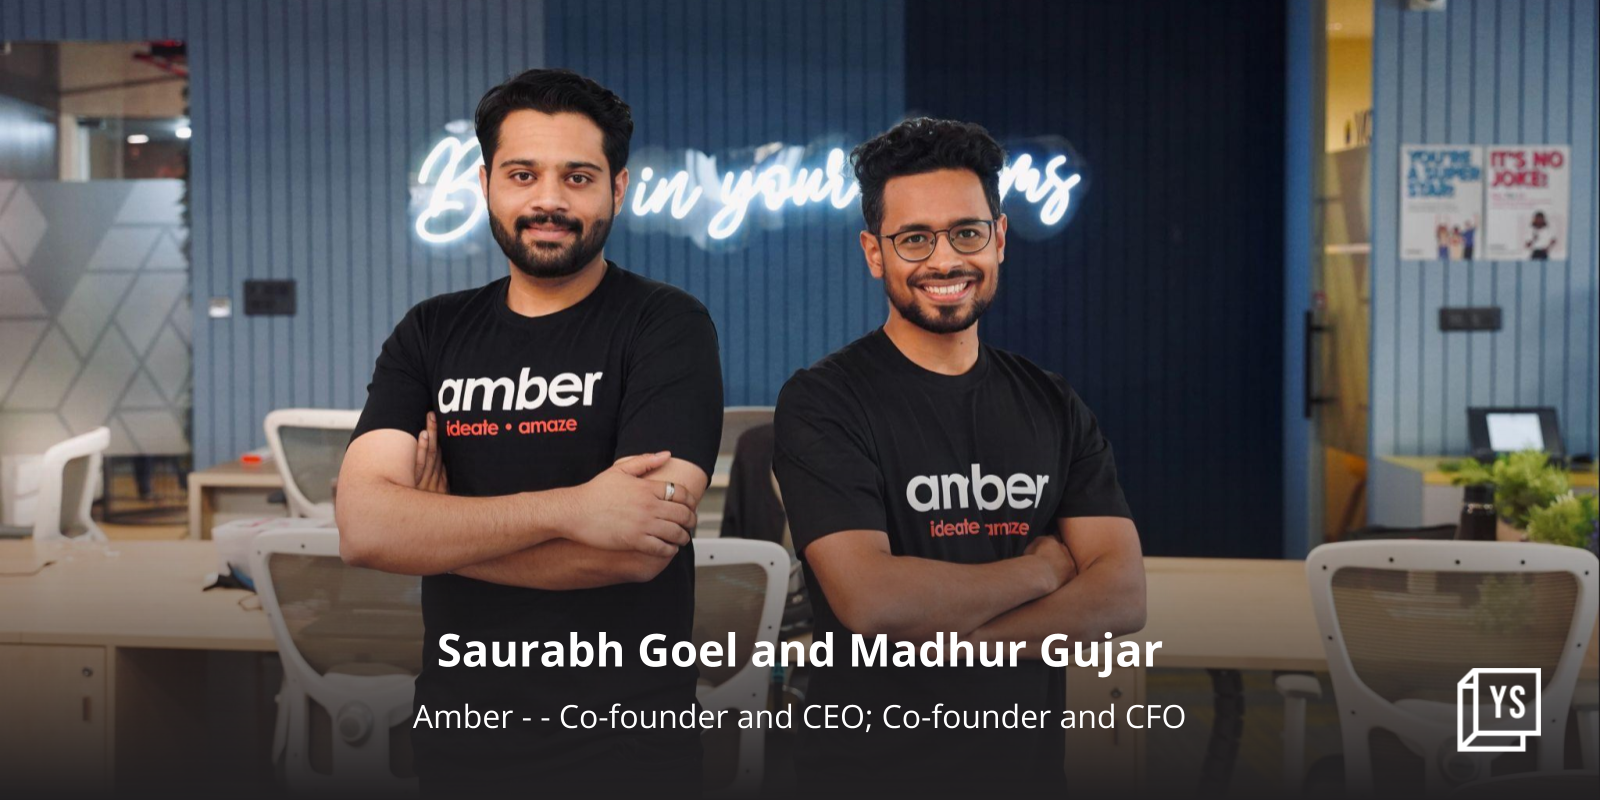 Student accommodation platform Amber bags $21M in funding round led by Gaja Capital